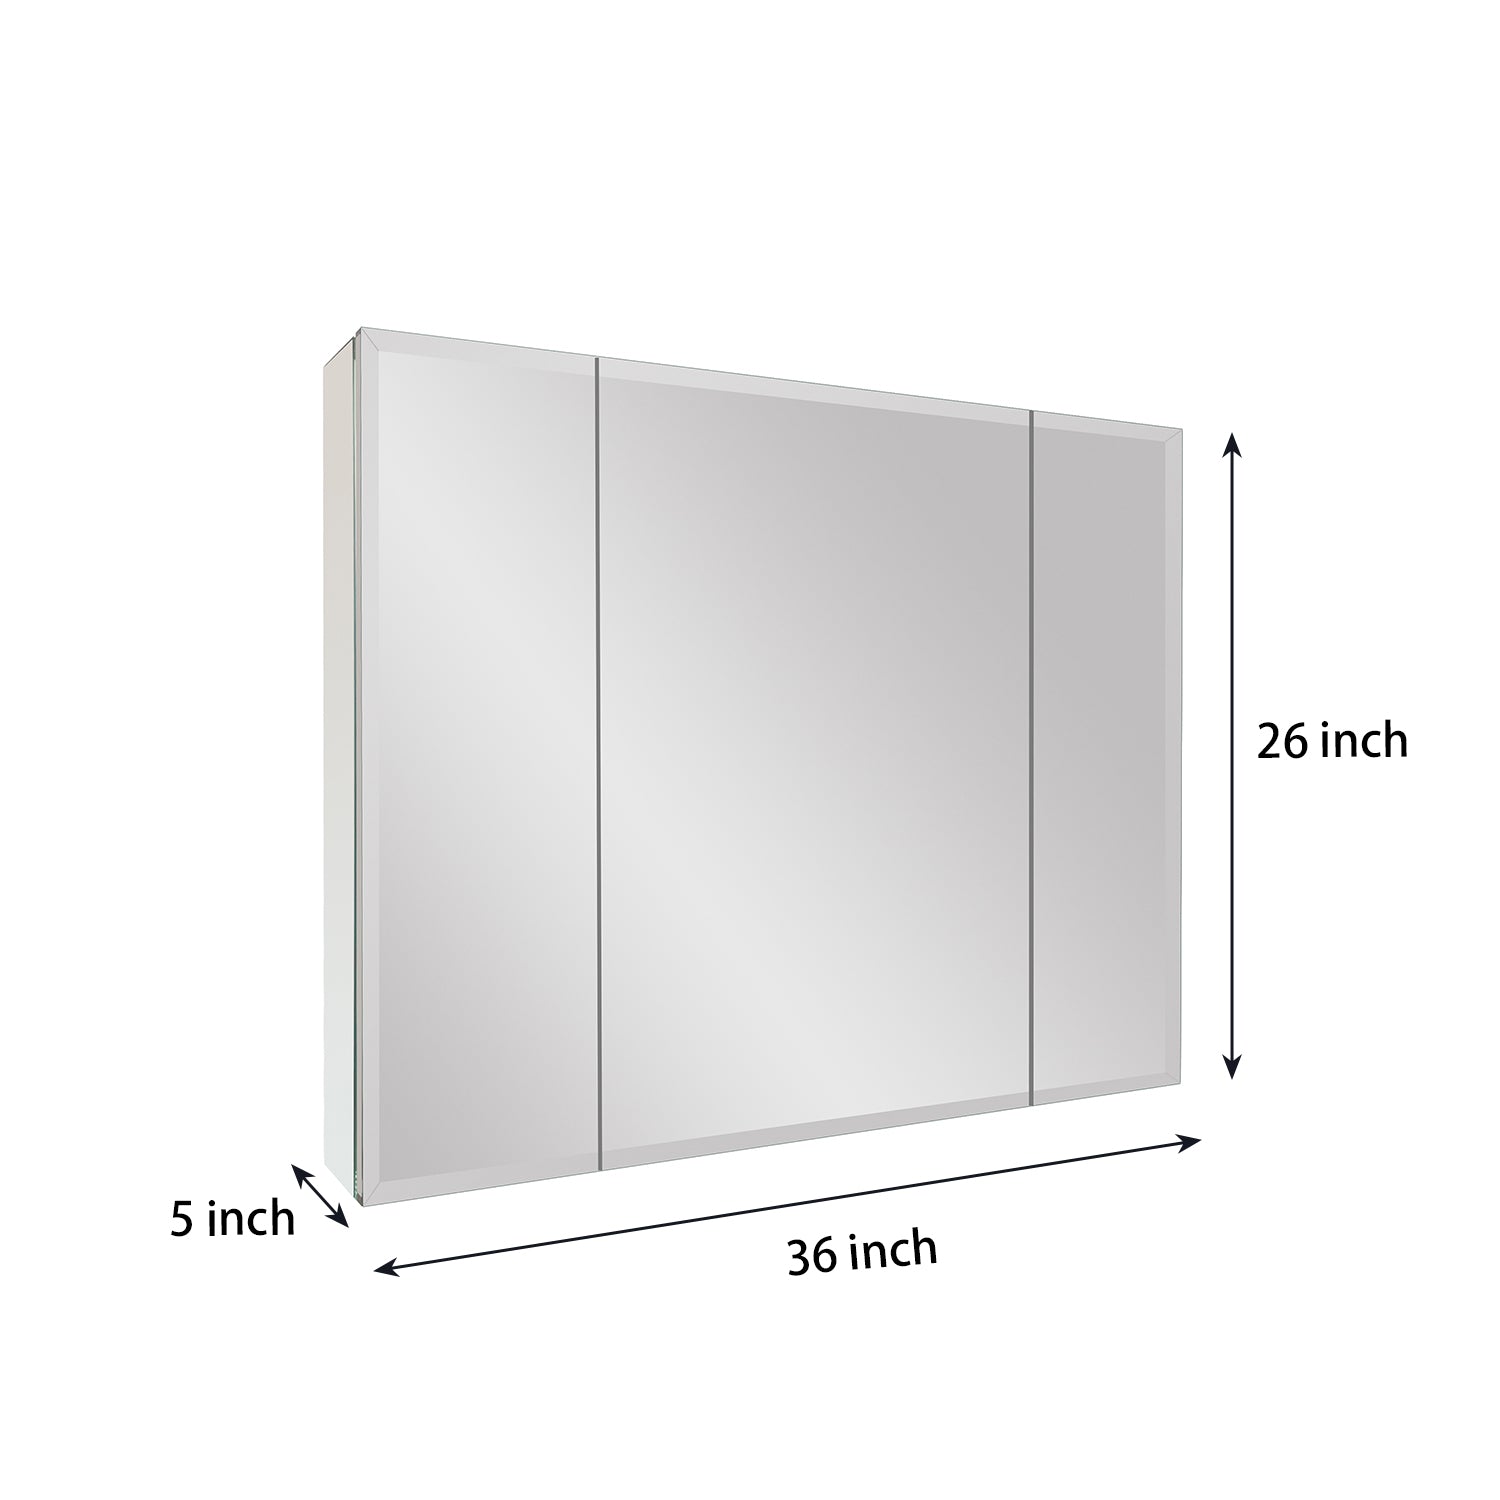 Staykiwi 36" Surface Mount Bathroom Medicine Cabinet with Mirror and Shelves